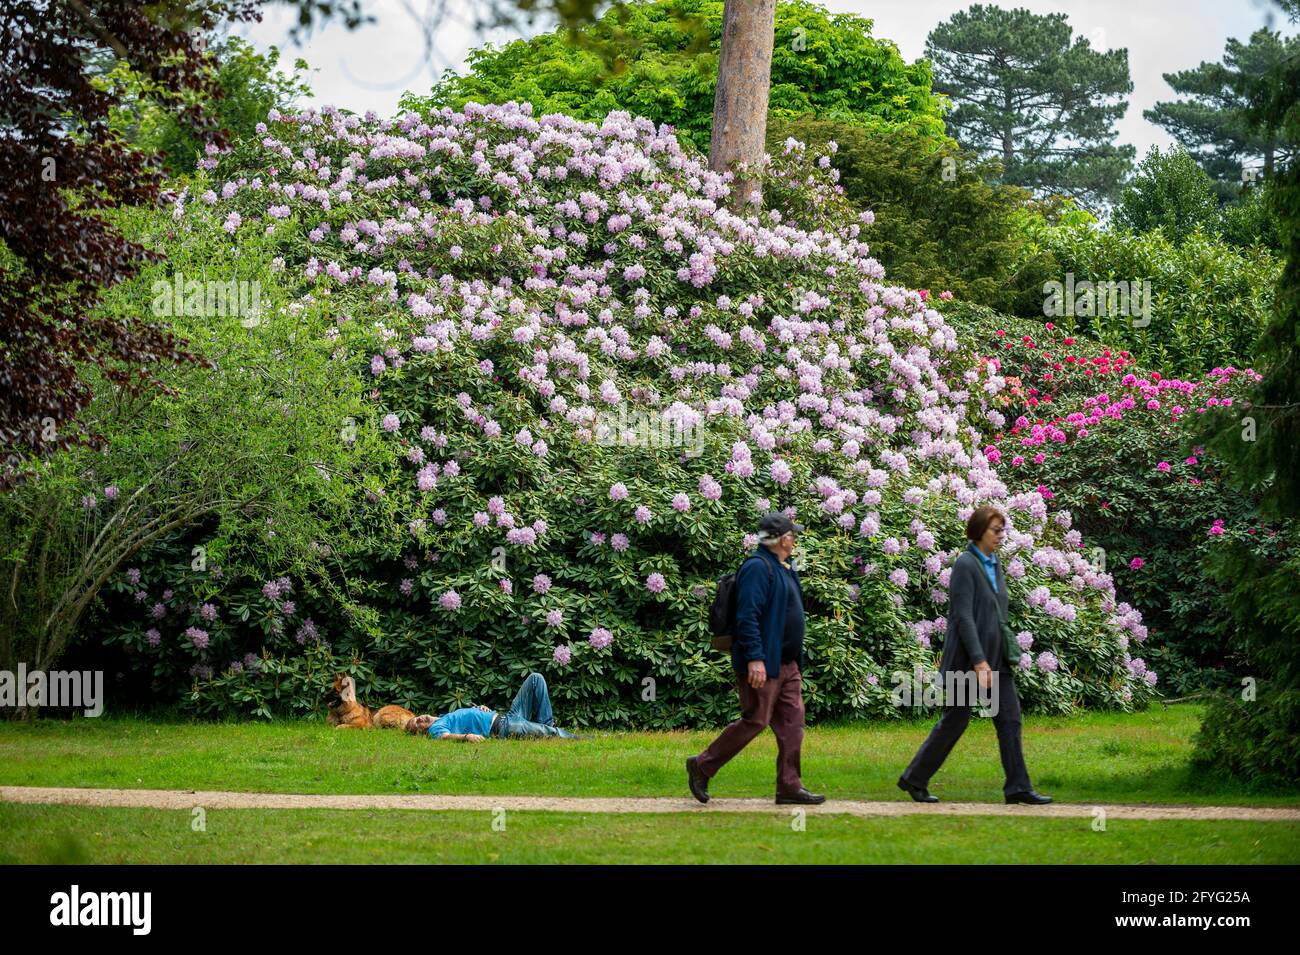 Iver, UK.  28 May 2021. UK Weather: People walk past a man sunbathing amongst the rhododendrons and azalea, currently in bloom, in the Temple Gardens at Langley Park in Iver, Buckinghamshire ahead of the Bank Holiday weekend, when temperatures are expected to rise above 20C.  Langley Park is a former royal hunting ground with links back to King Henry VIII, Queen Elizabeth I and Queen Victoria.   Credit: Stephen Chung / Alamy Live News Stock Photo